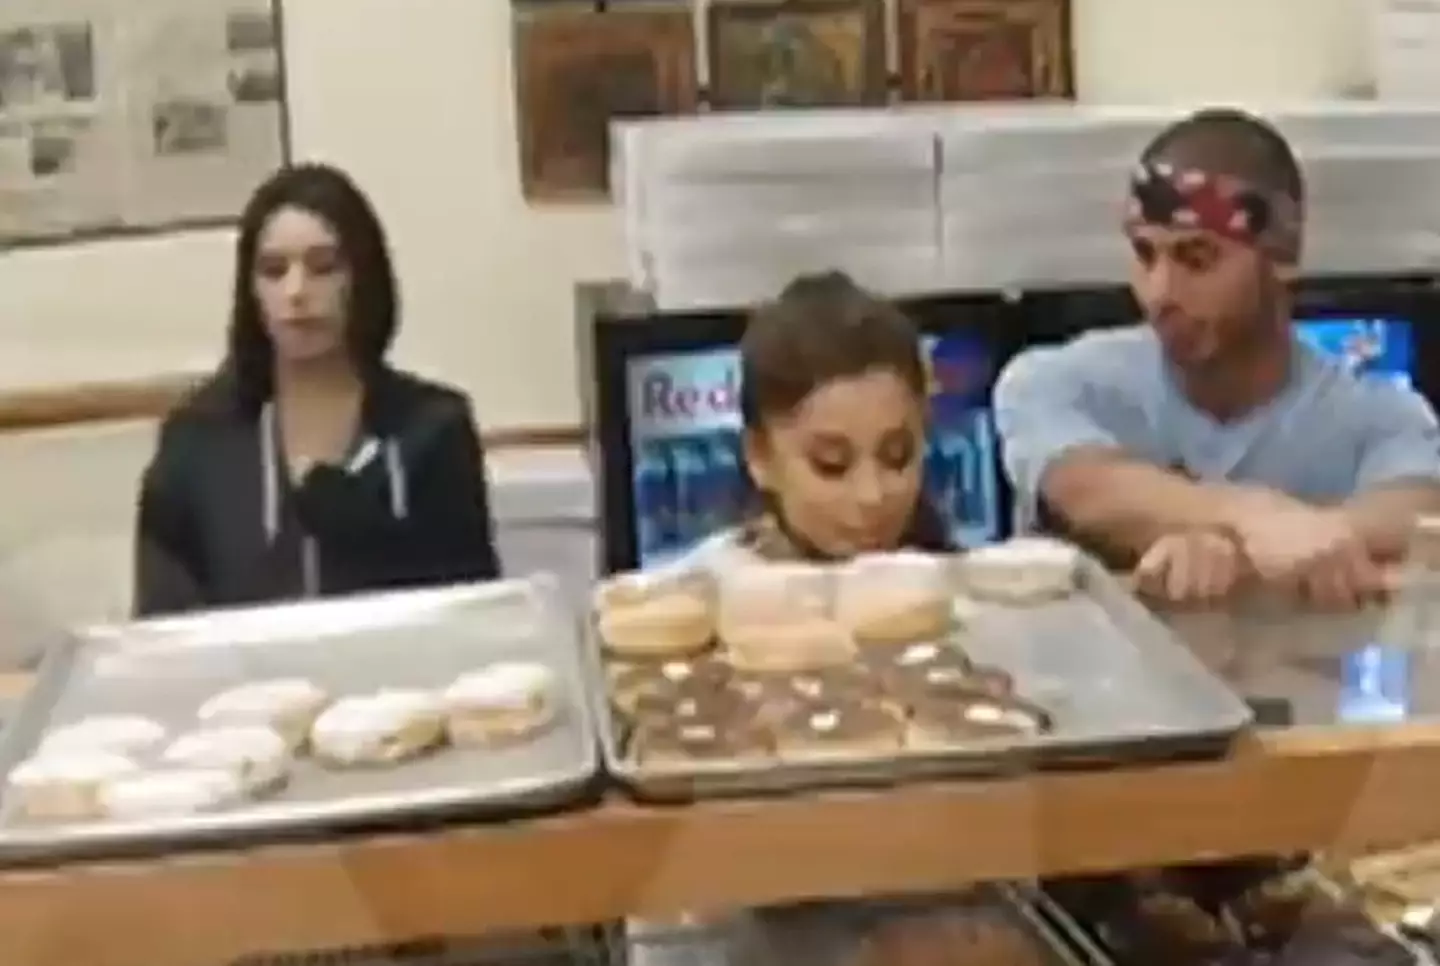 Ariana Grande got caught on camera licking donuts she didn't pay for.